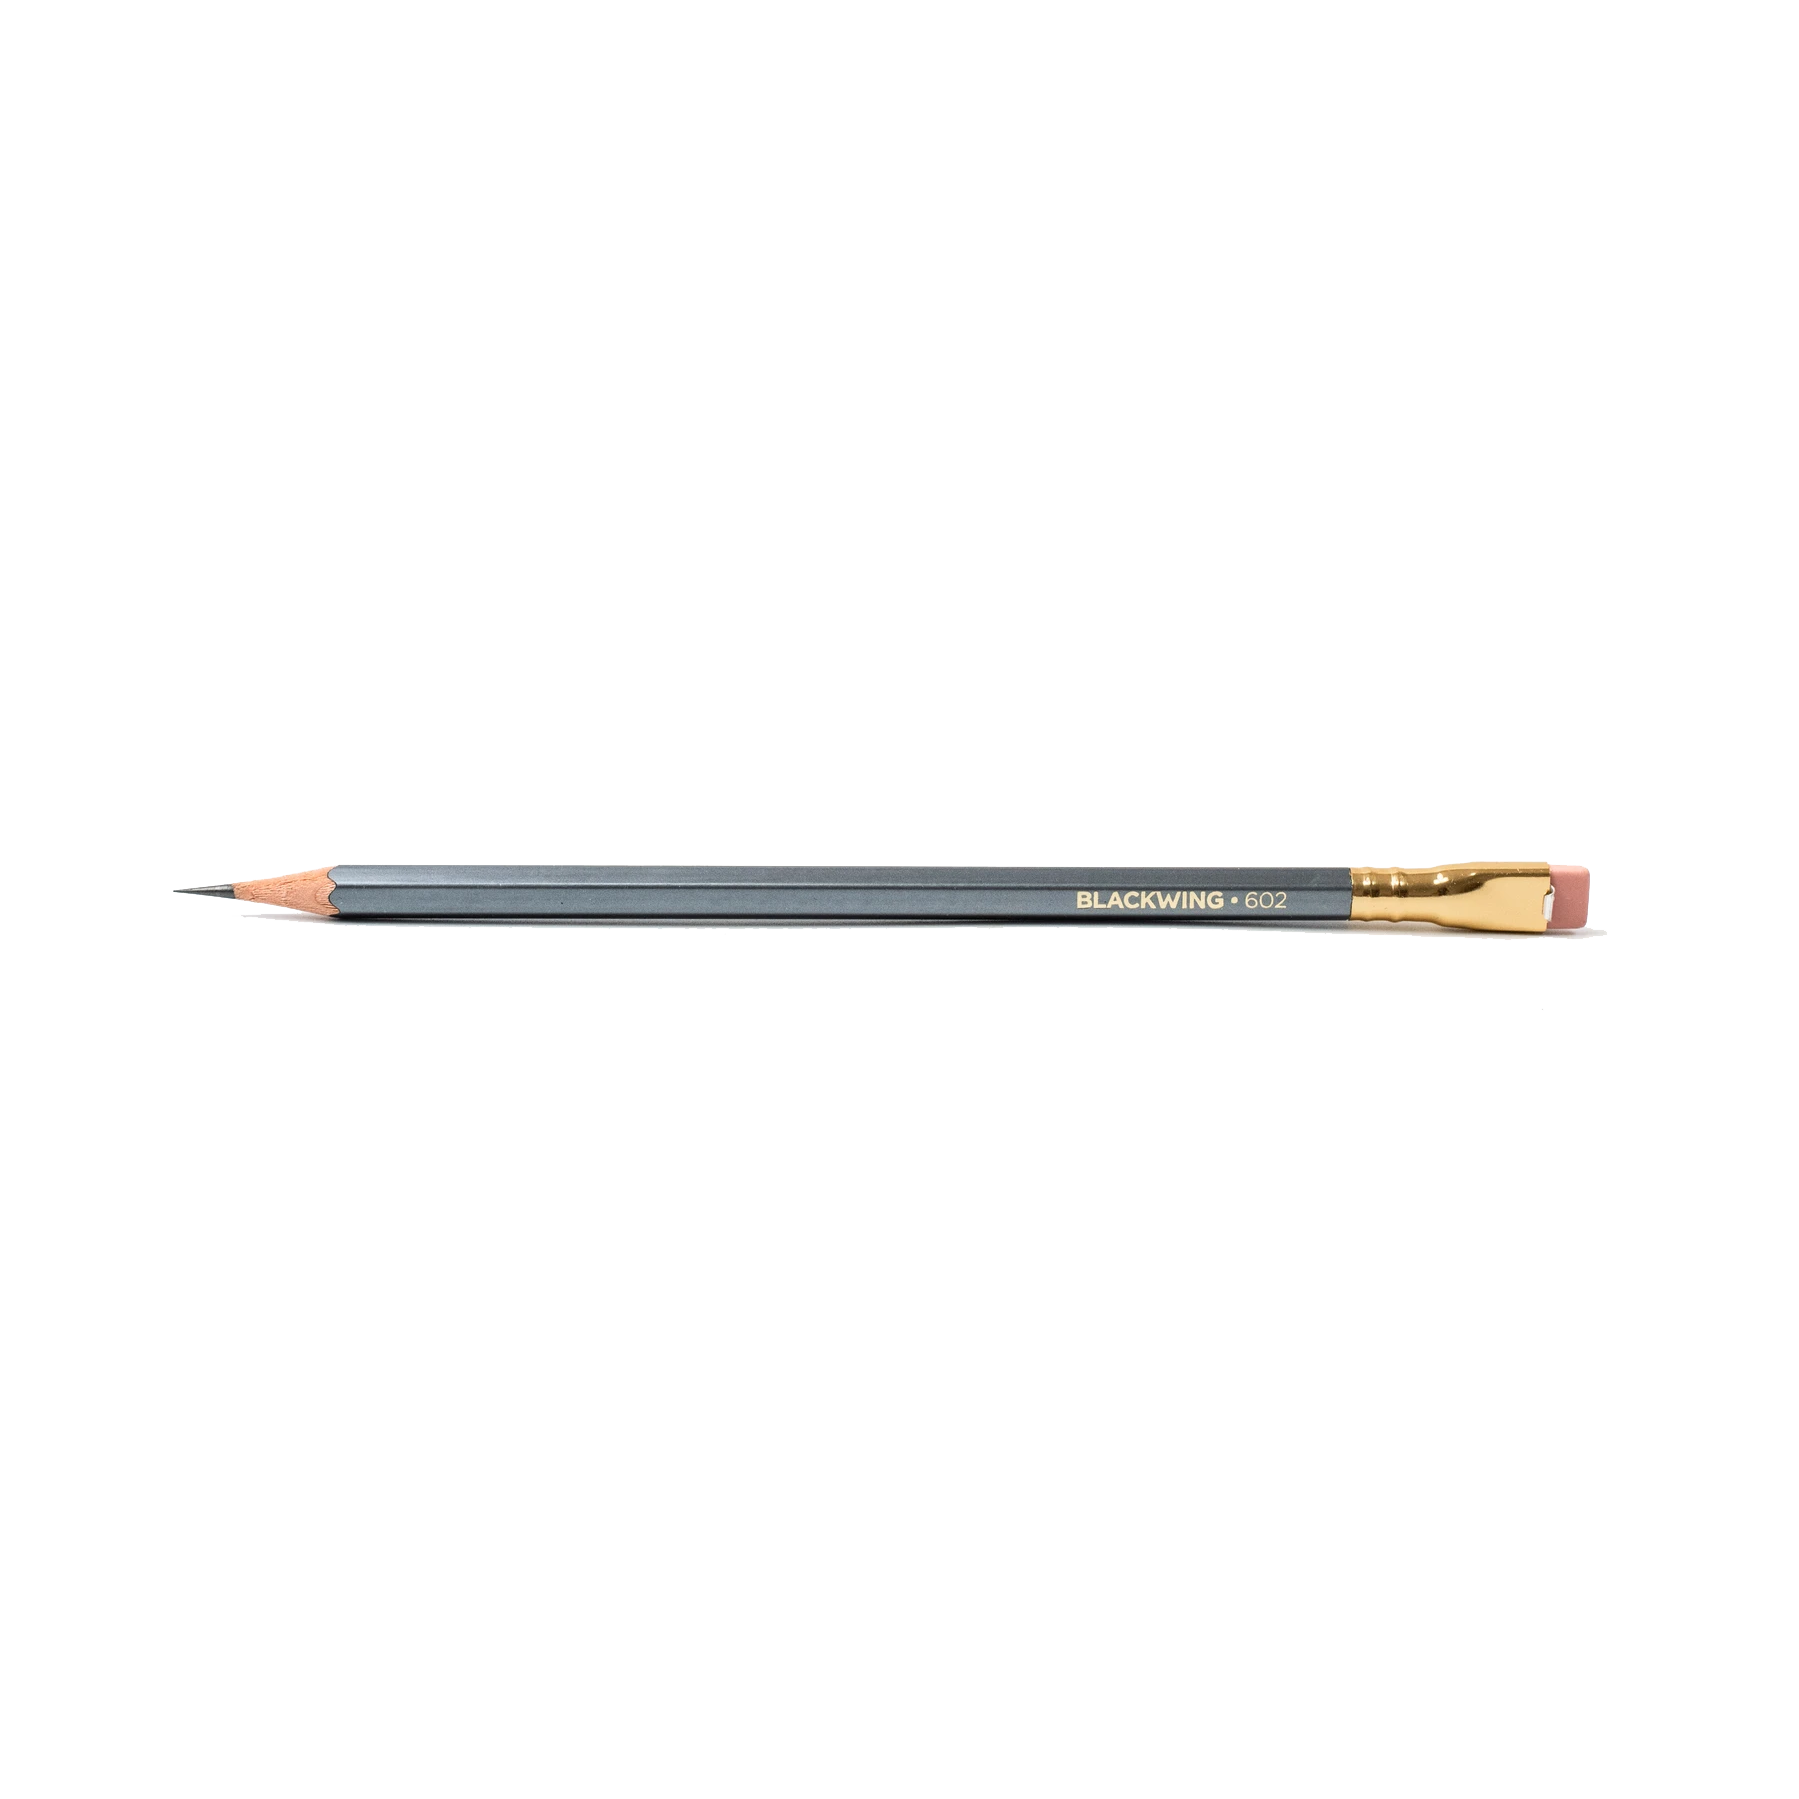 The Parts Of Wooden Pencil